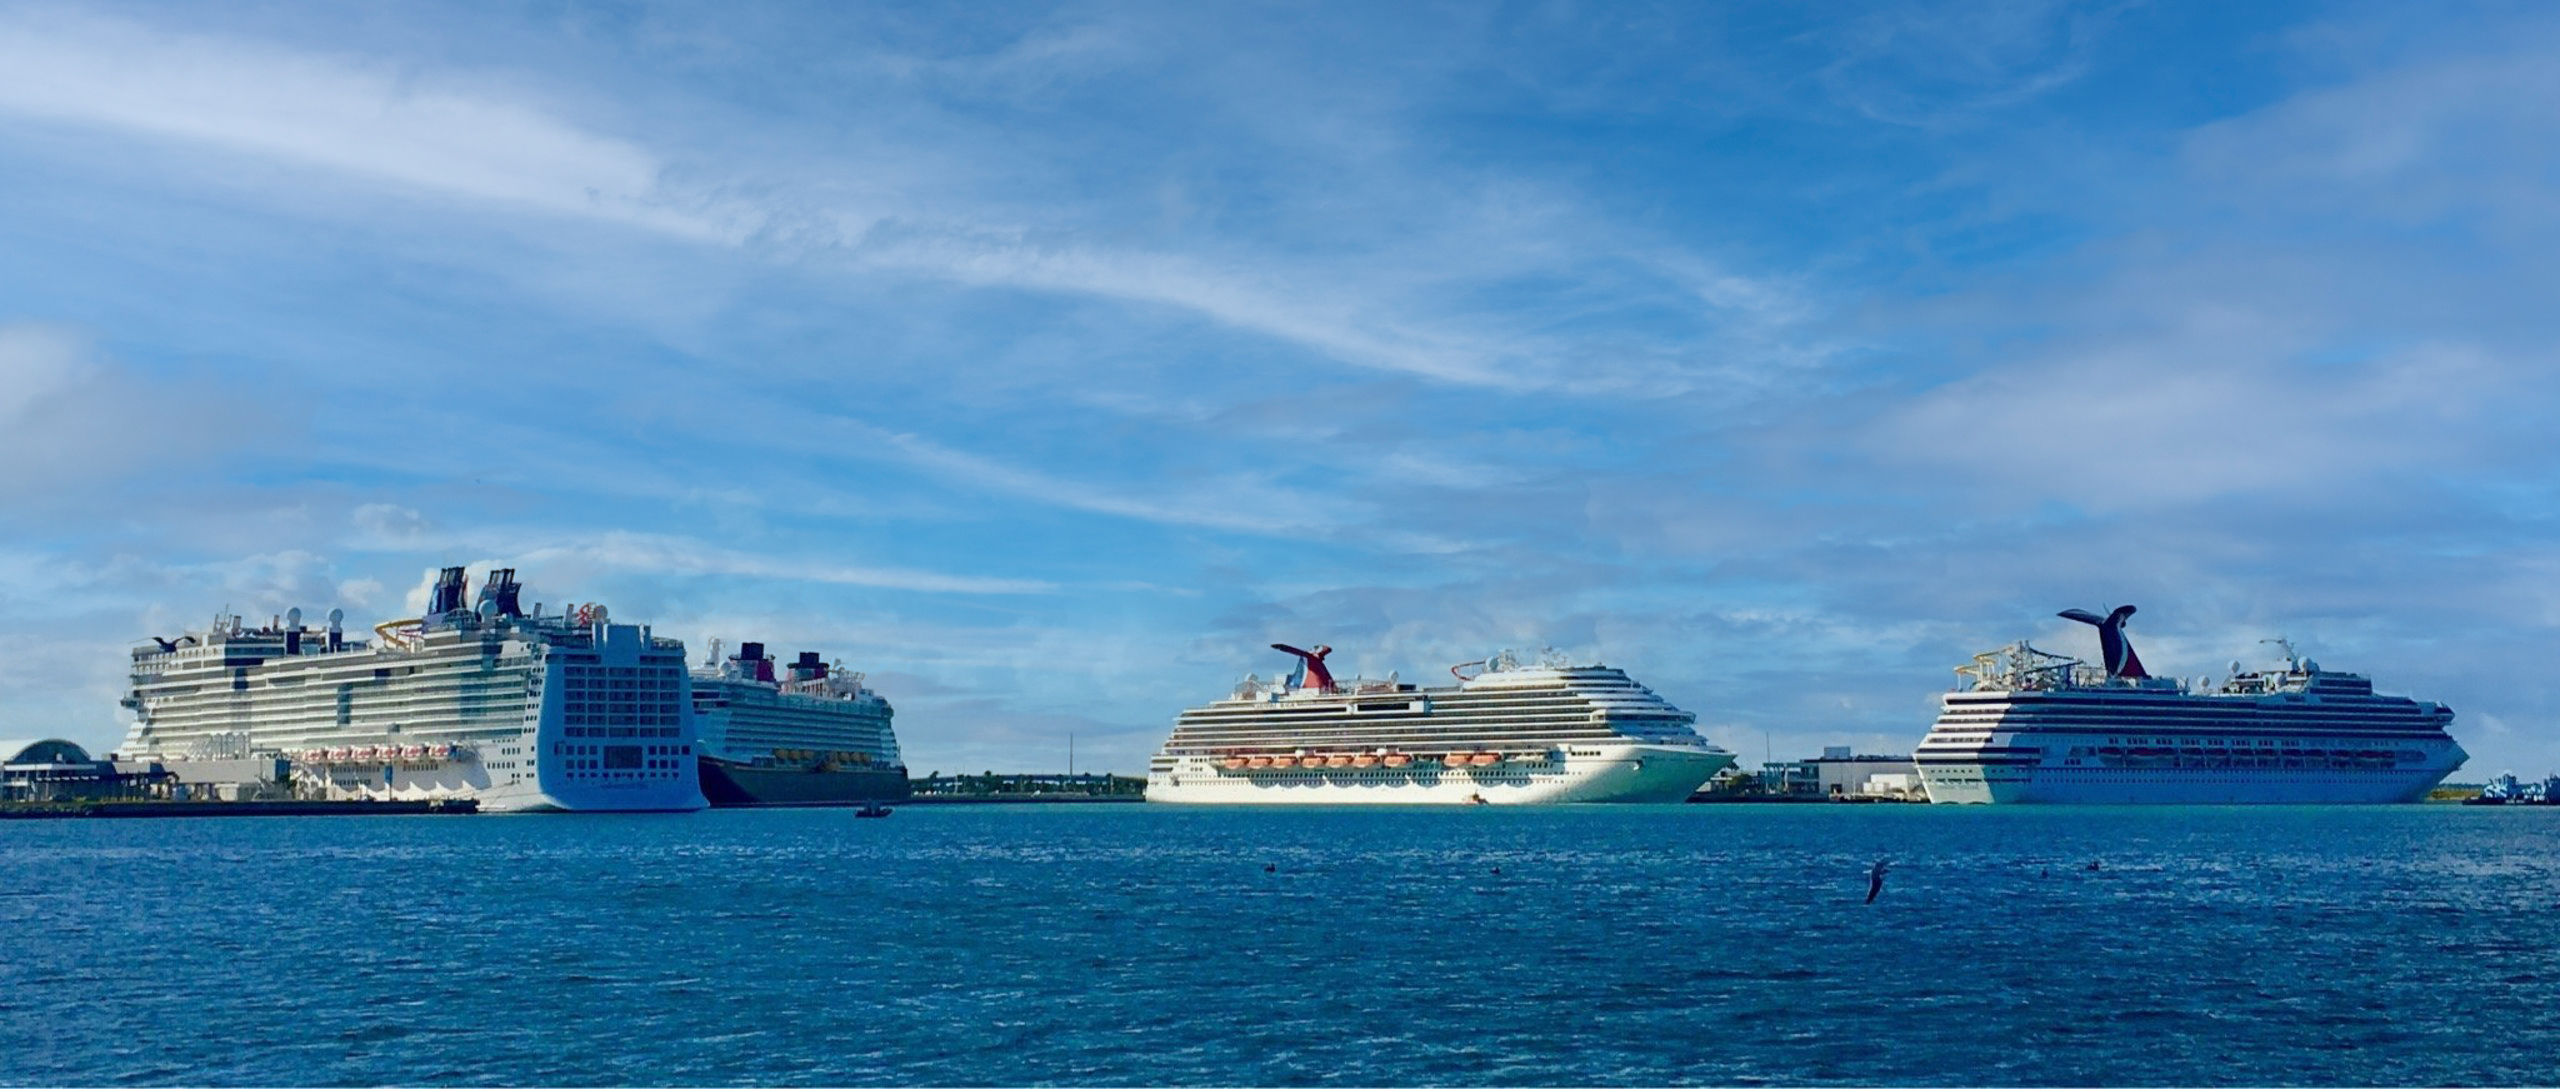 port canaveral cruise ships